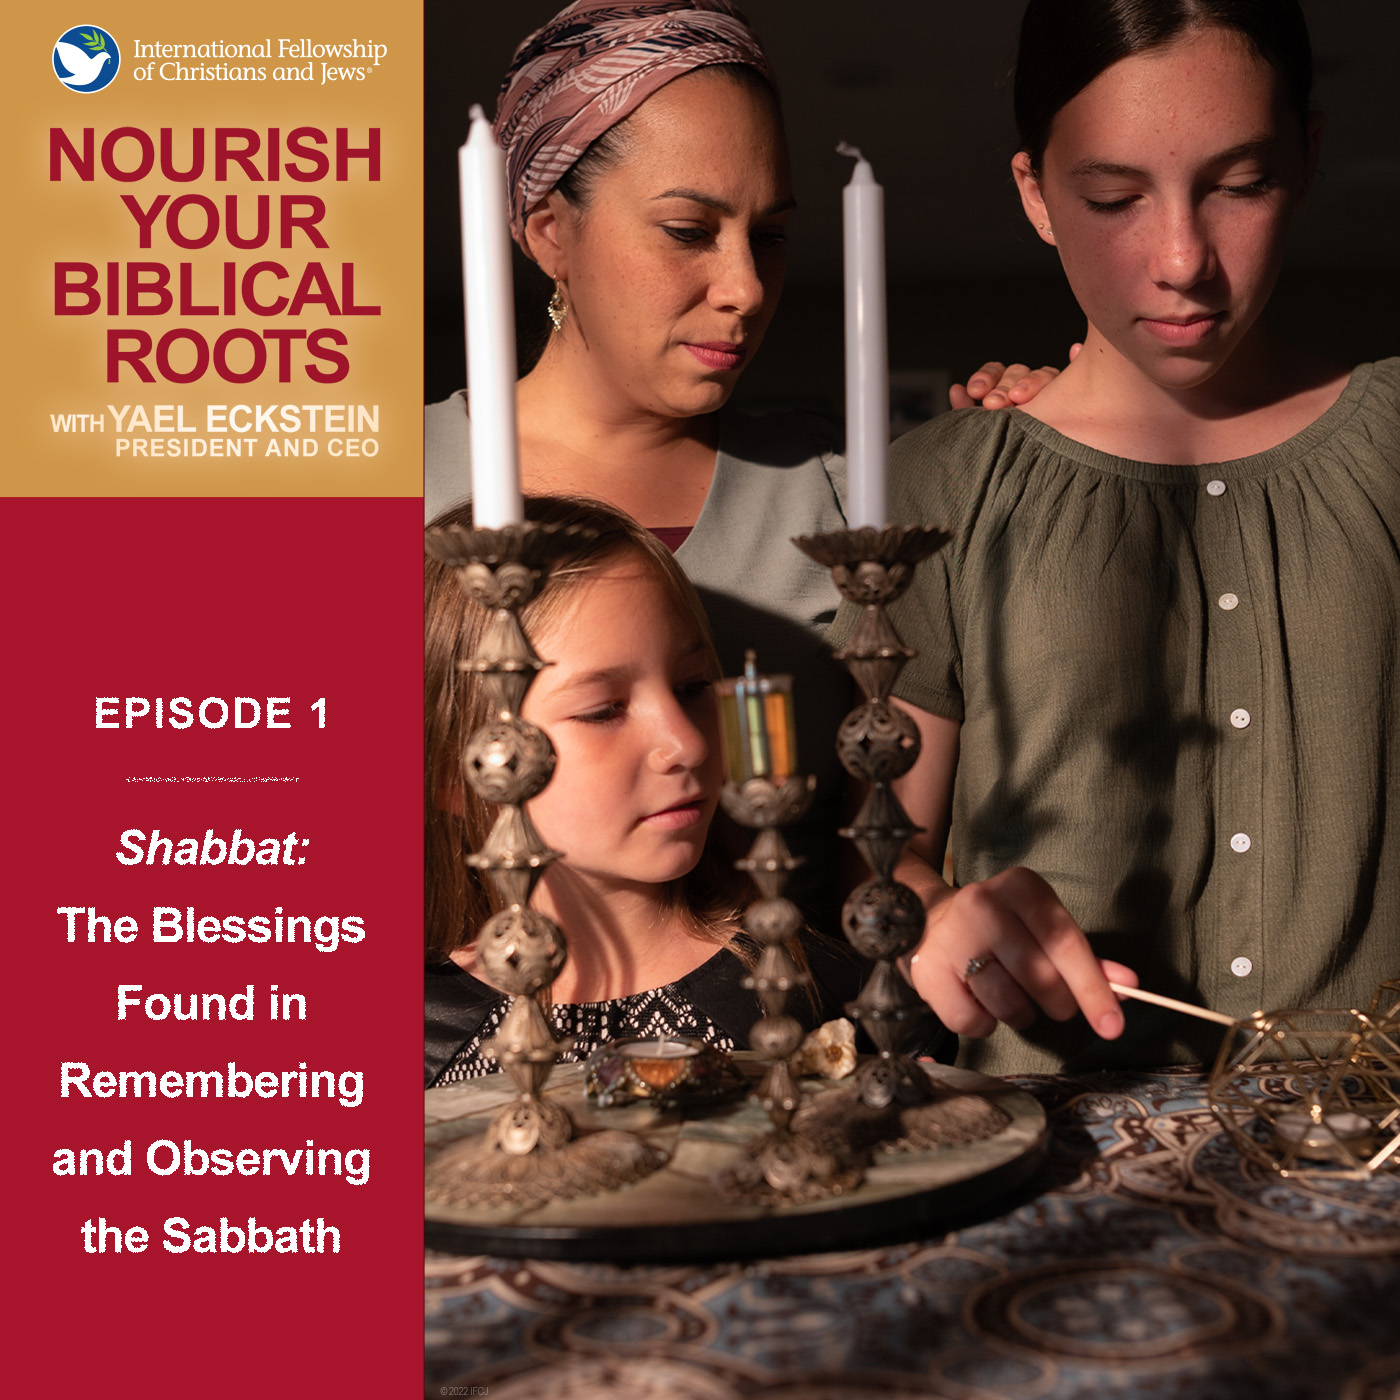 Shabbat: The Blessings Found in Remembering and Observing the Sabbath